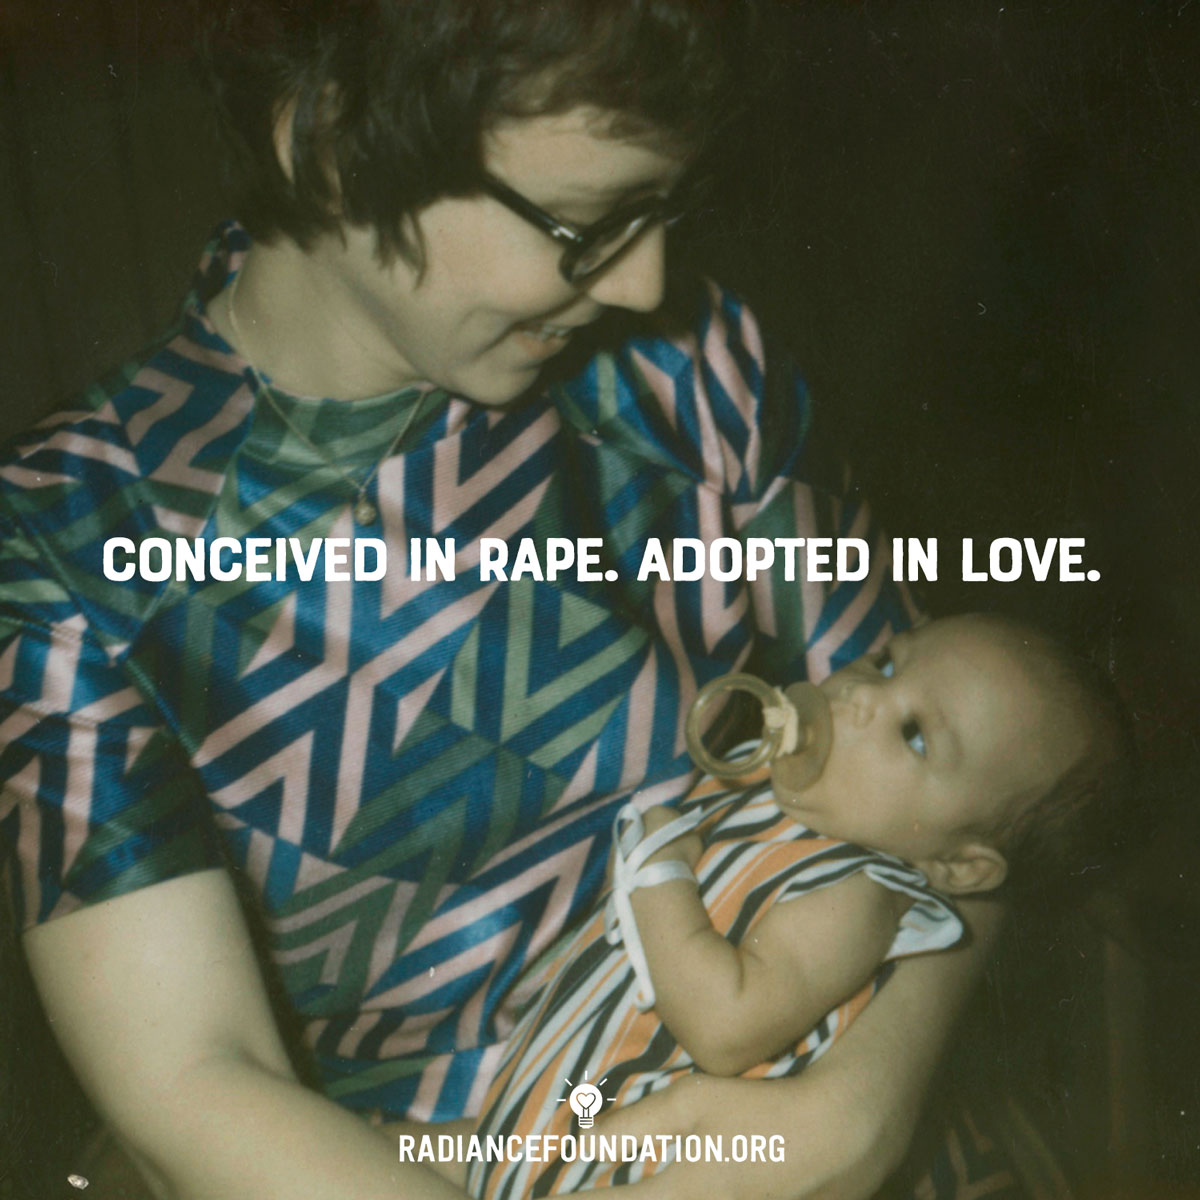 Ryan Bomberger - Conceived in rape. Adopted in Love.